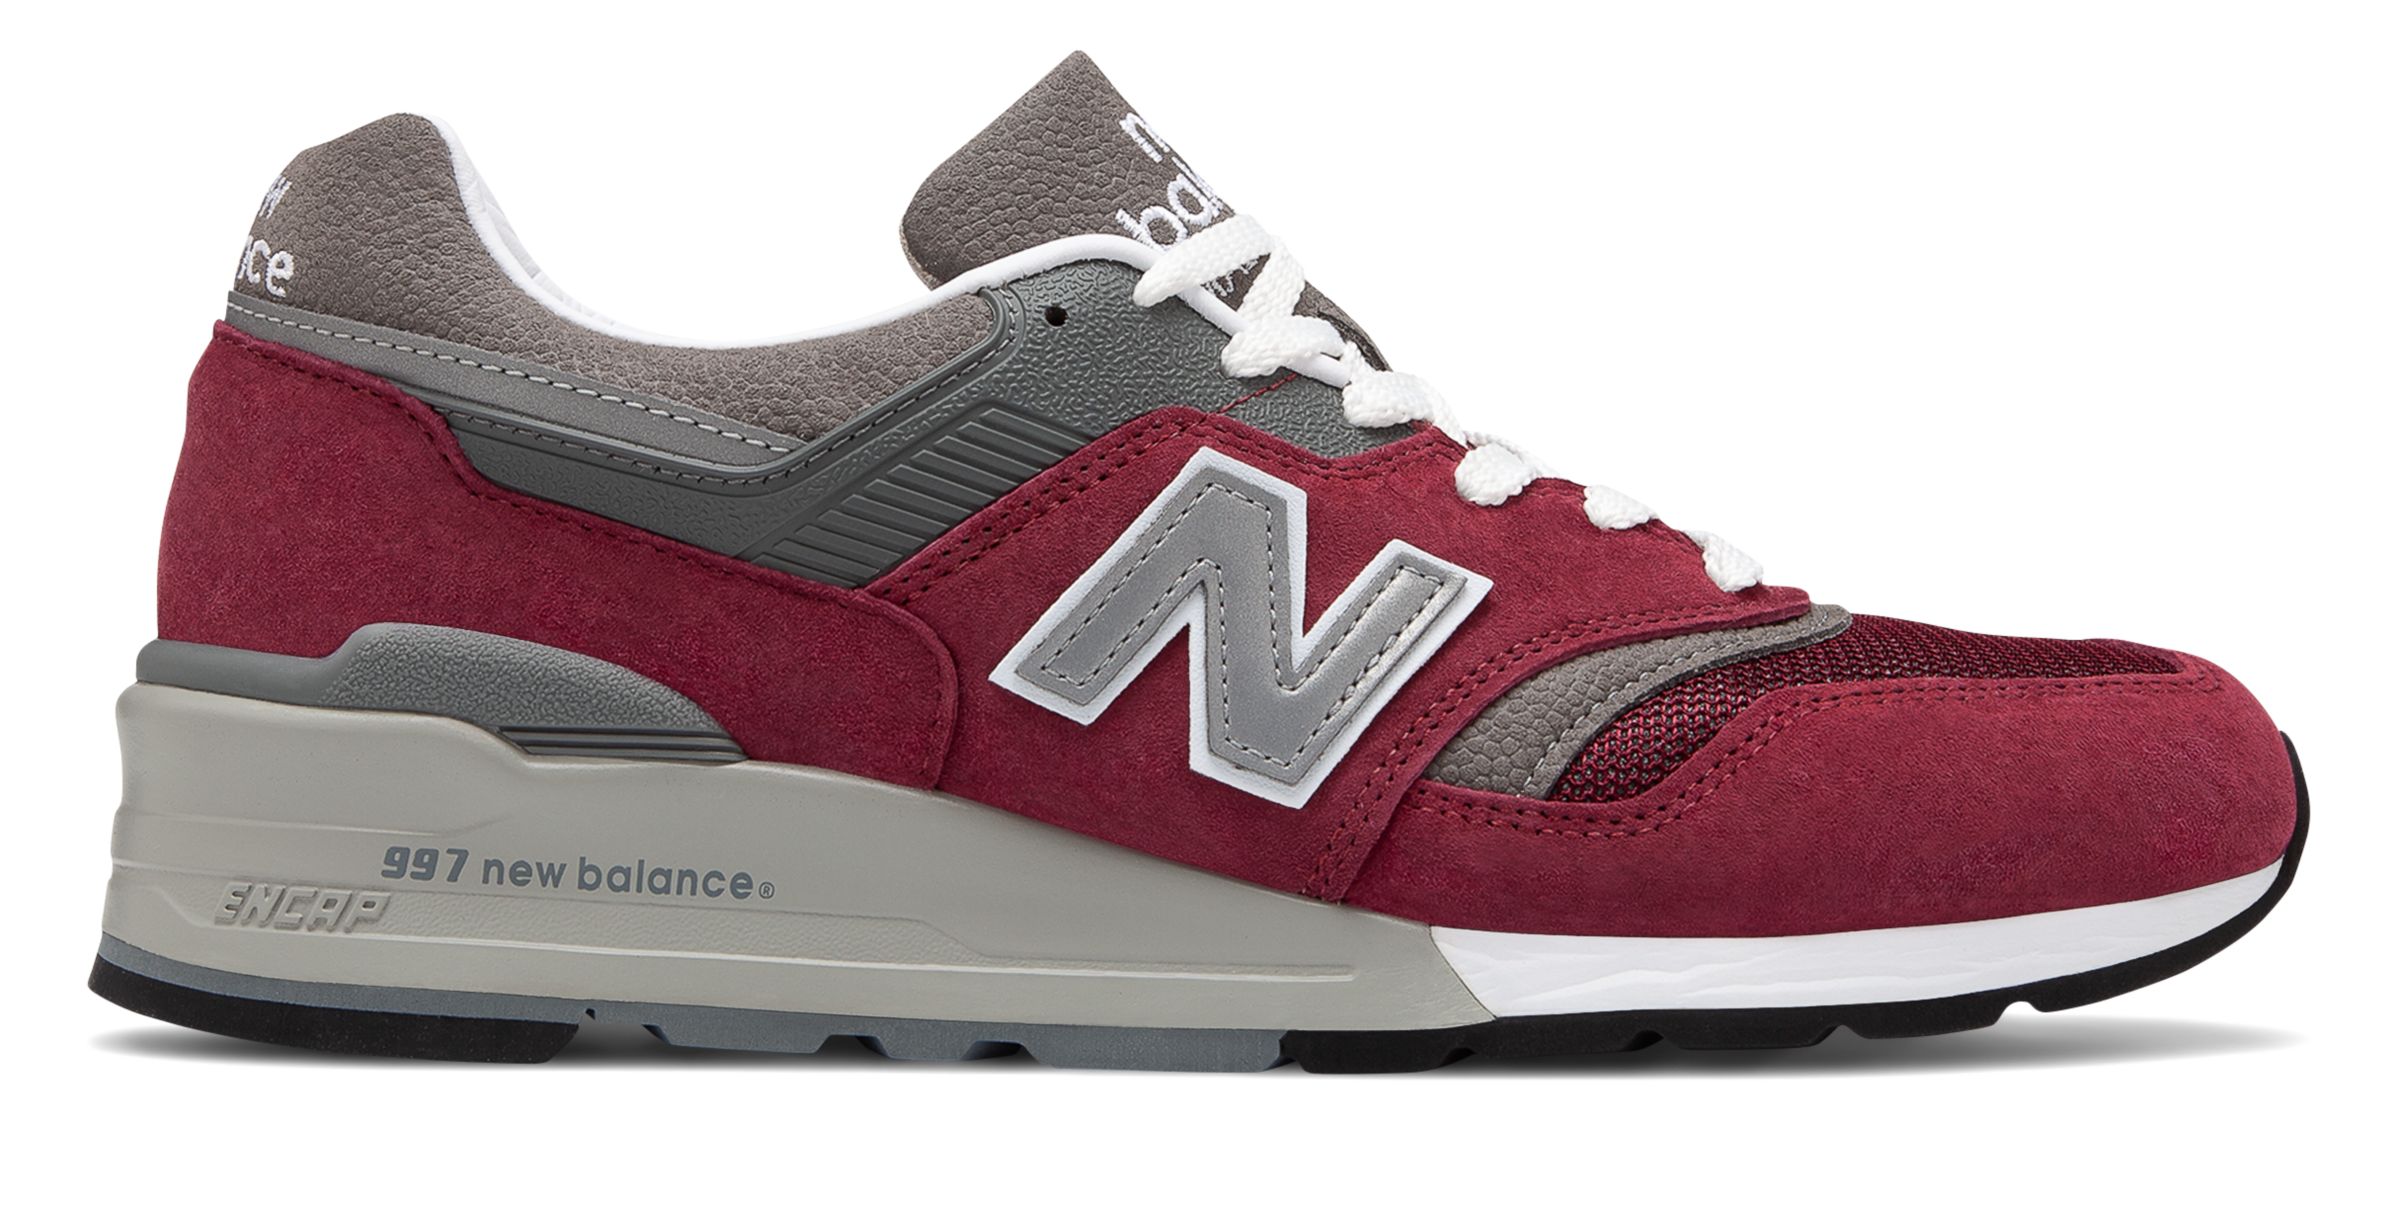 Men's Made in US 997 Shoes - New Balance